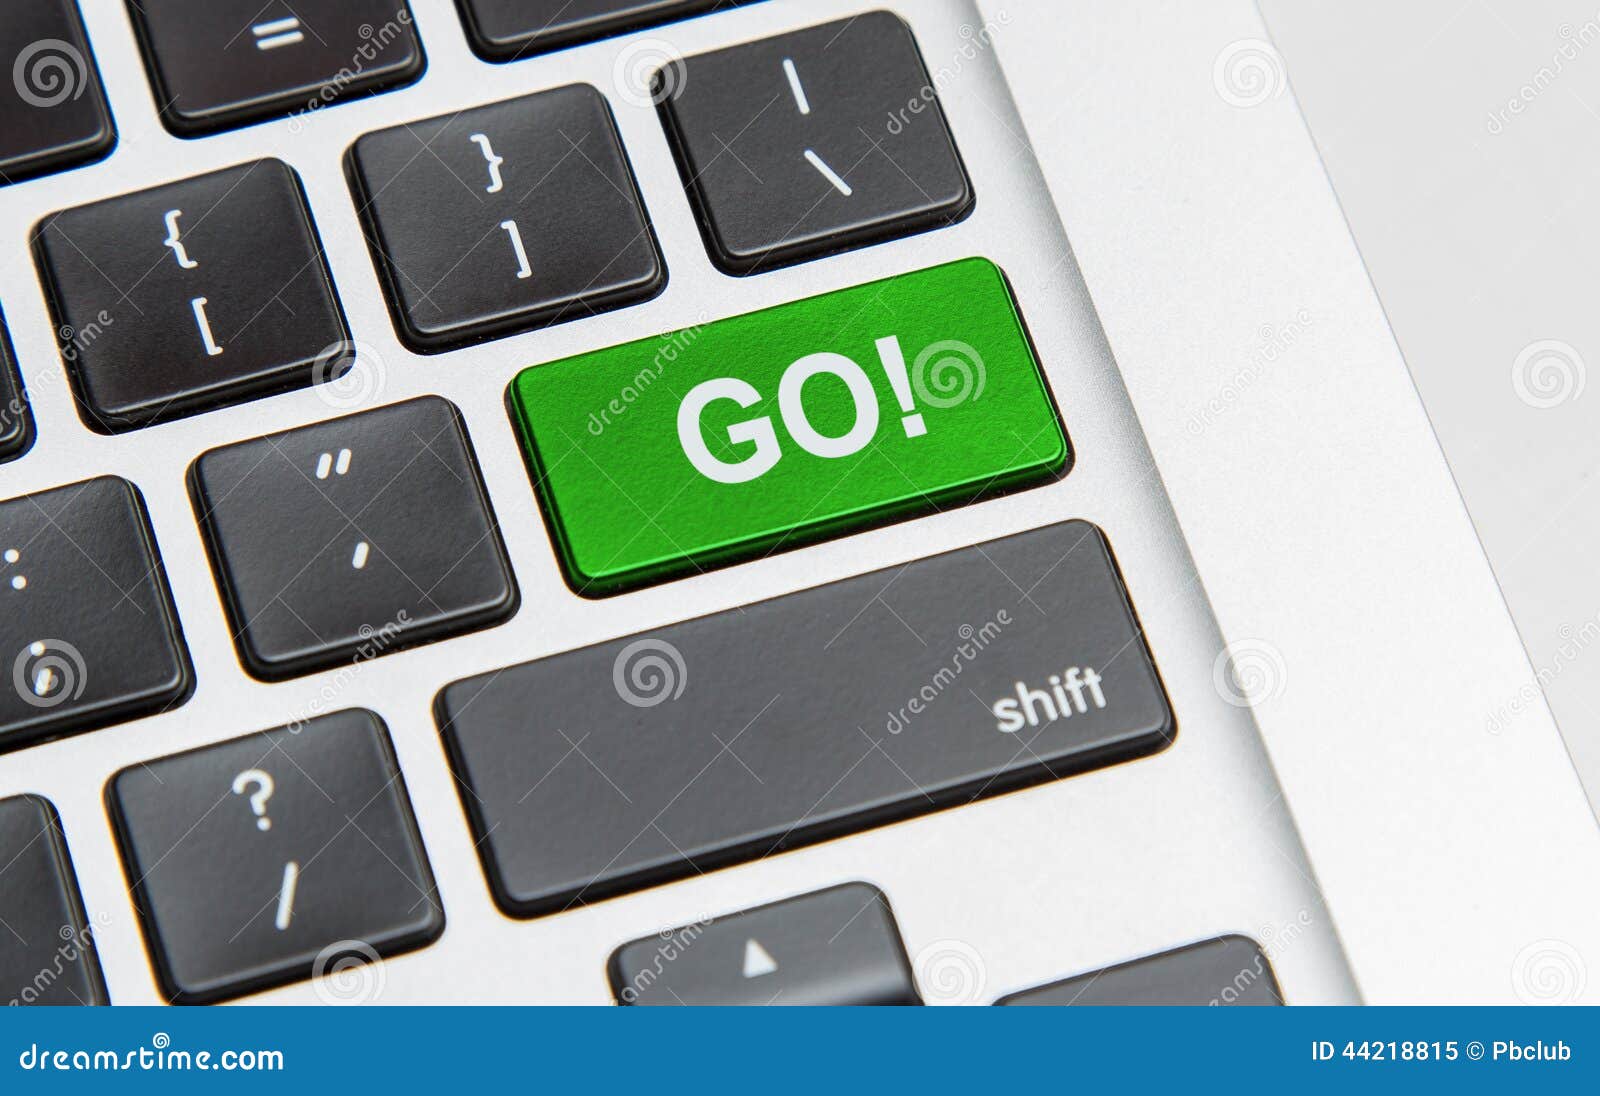 Green button with text go! stock illustration. Illustration of symbol ...